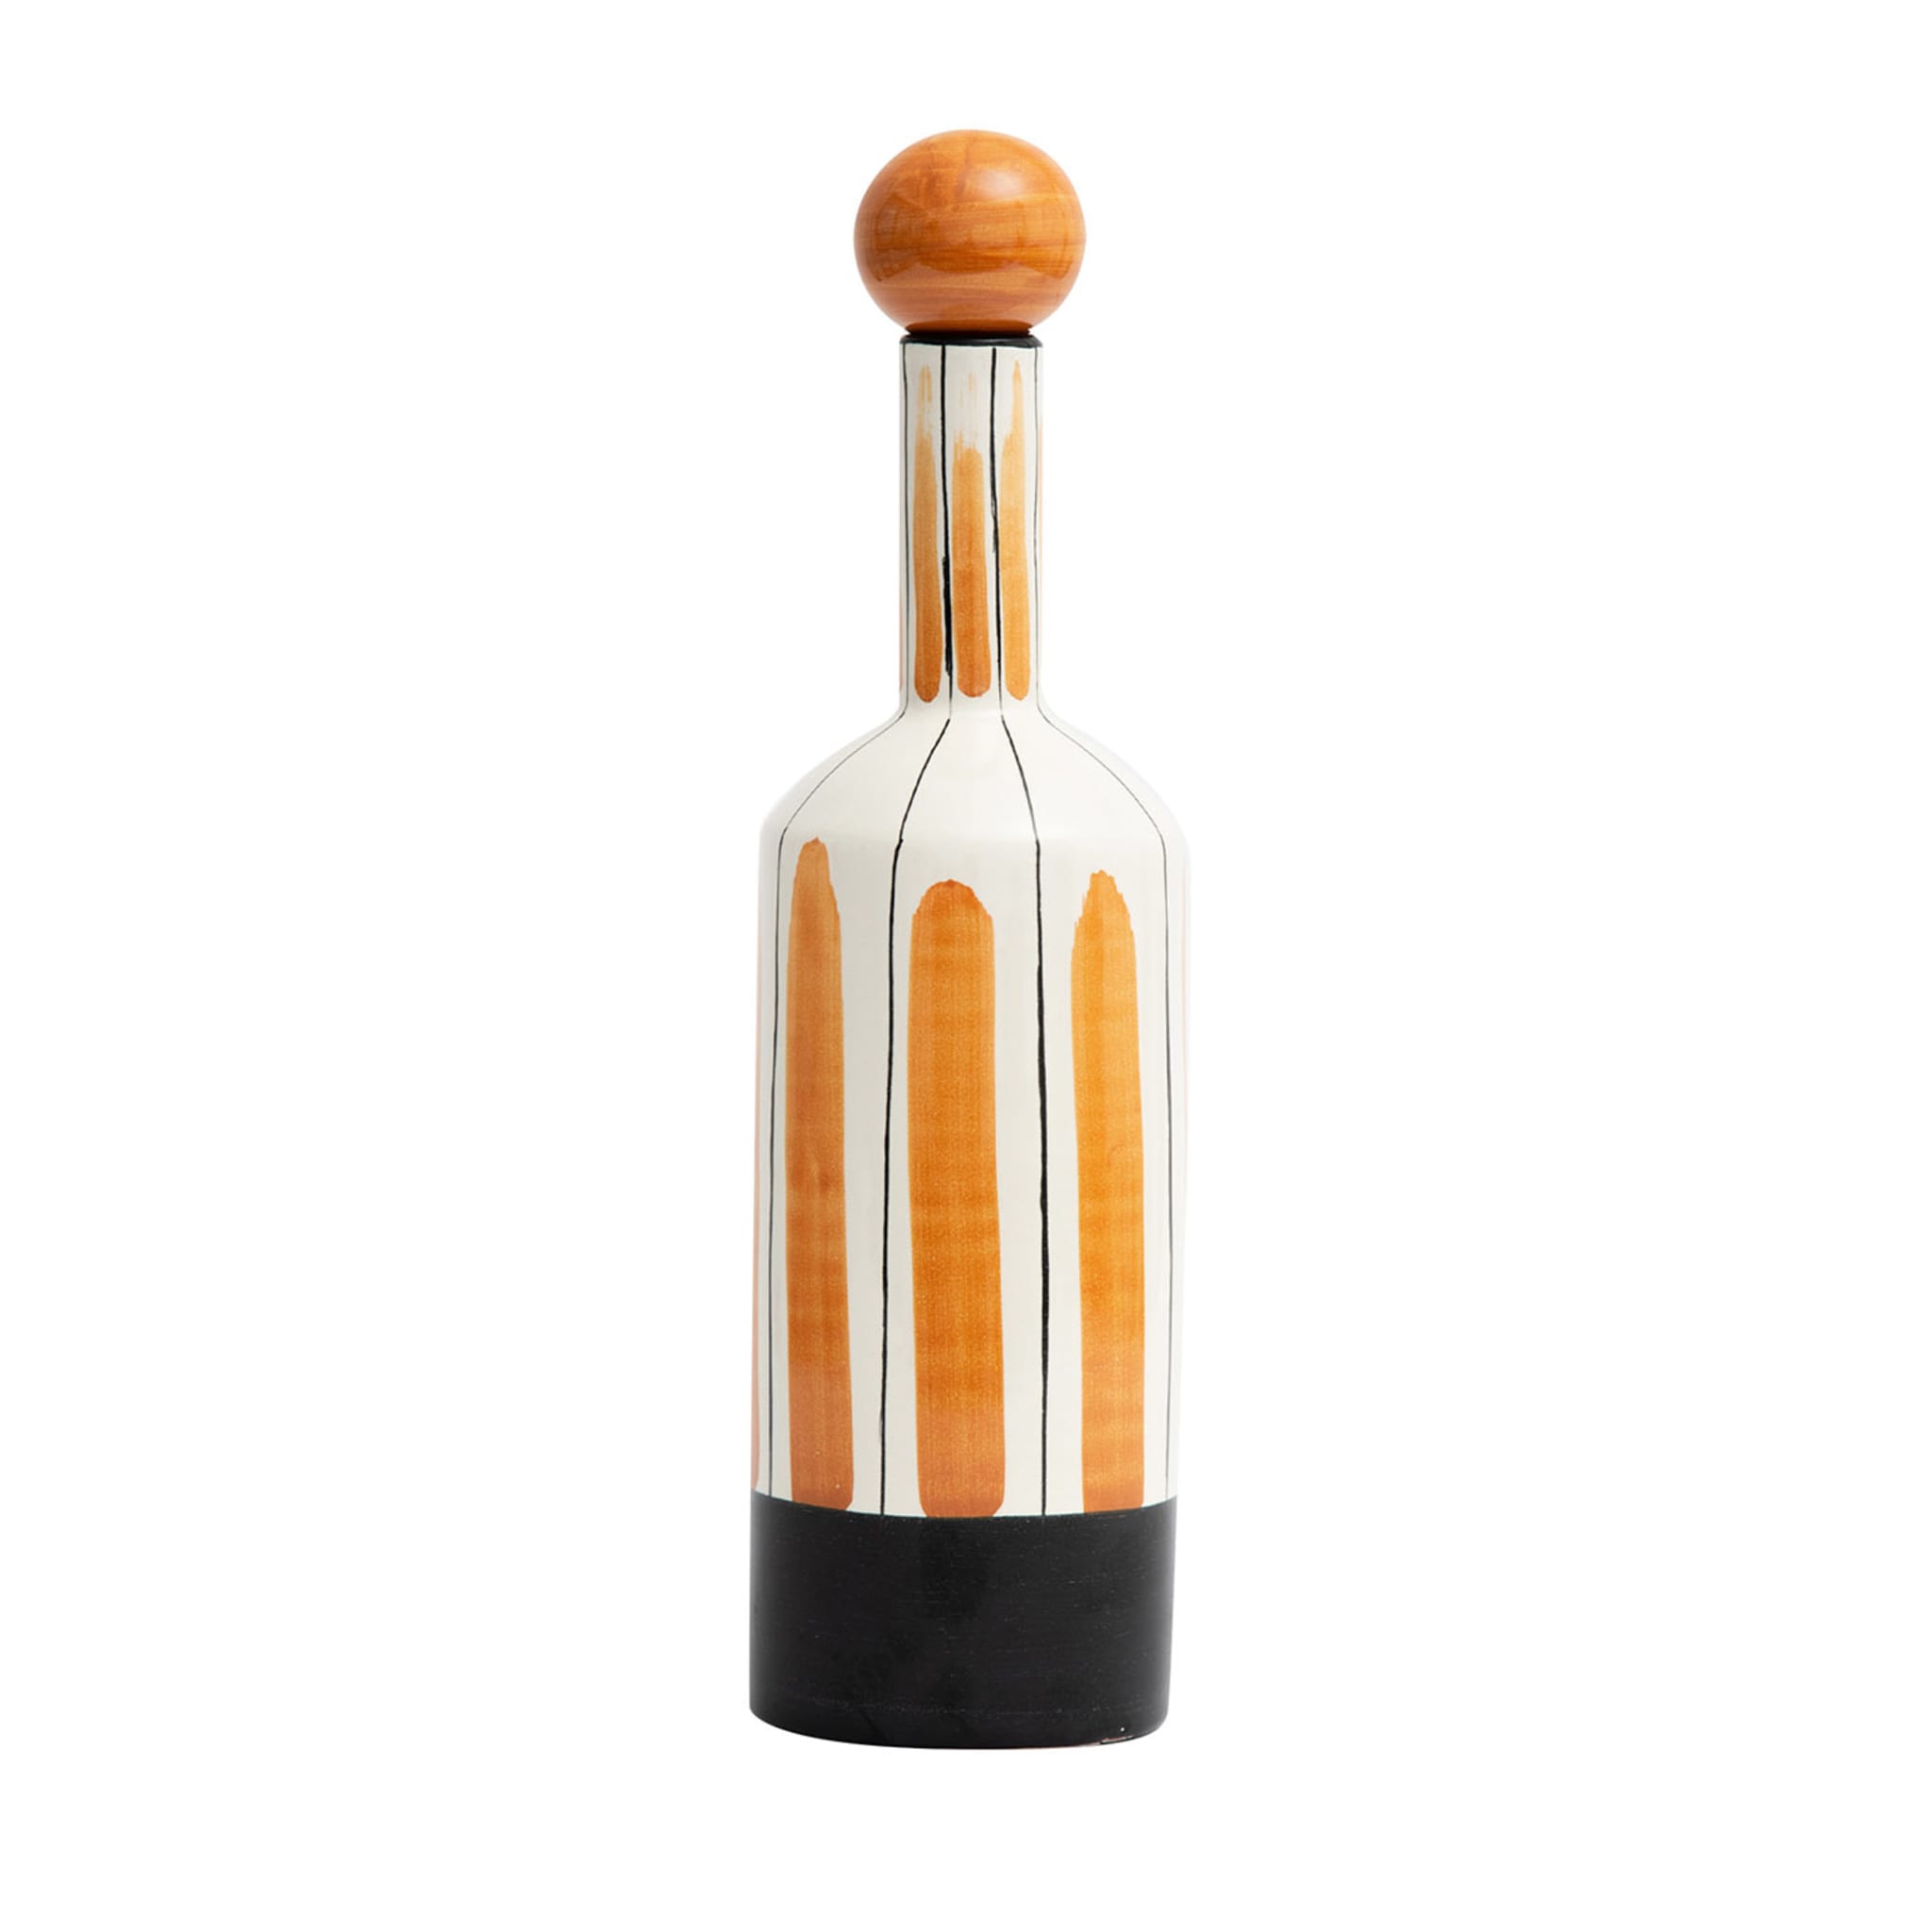 Talia Decorative Mustard Bottle with Lid - Main view